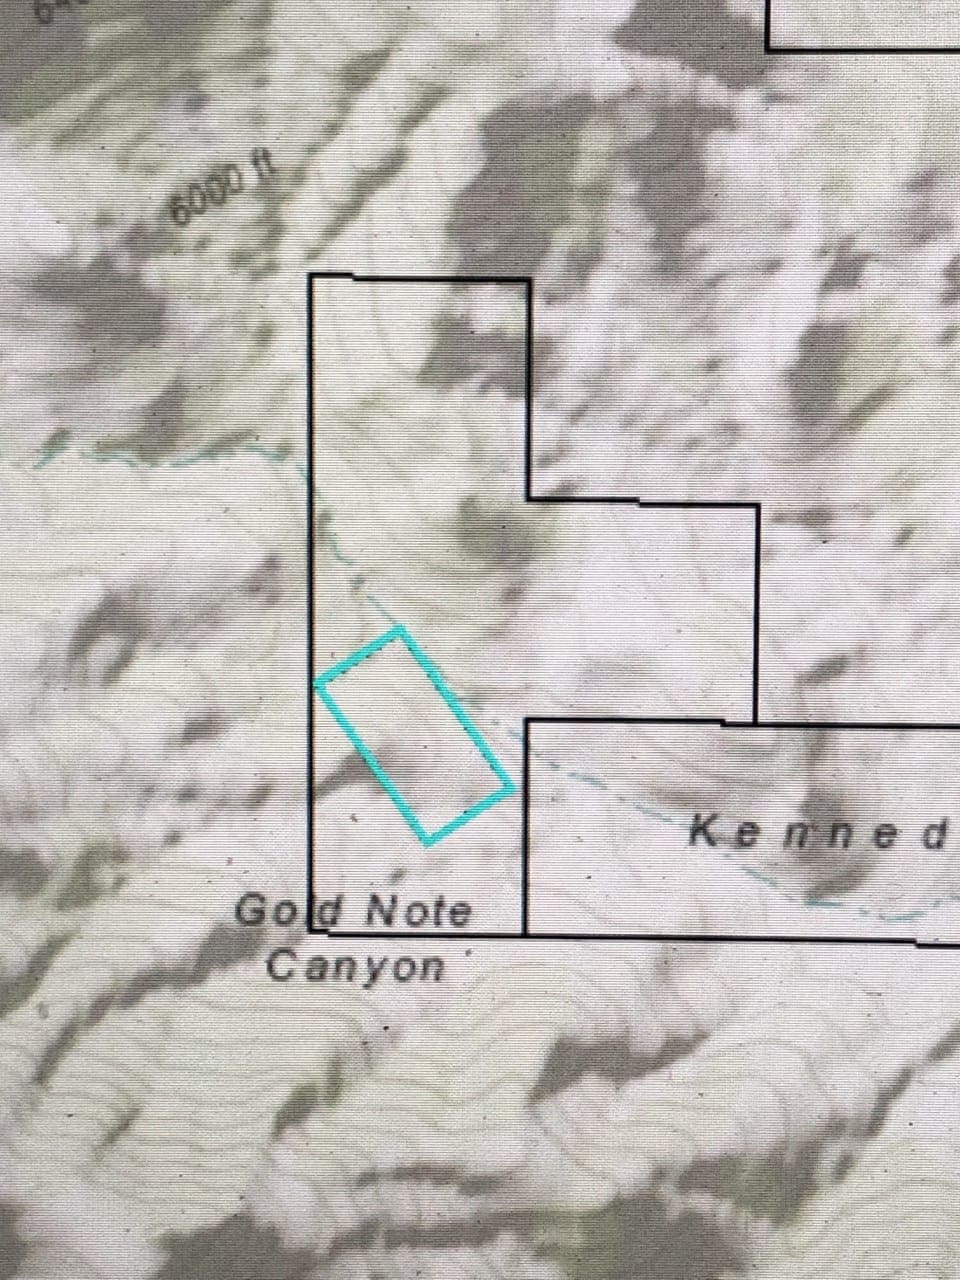 15.84 Acres in GOLD NOTE CANYON, HIDDEN TREASURE #1, SUR 2097 – A PATENTED MINING CLAIM -PAST PRODUCER OF GOLD, SILVER & ZINC photo 27